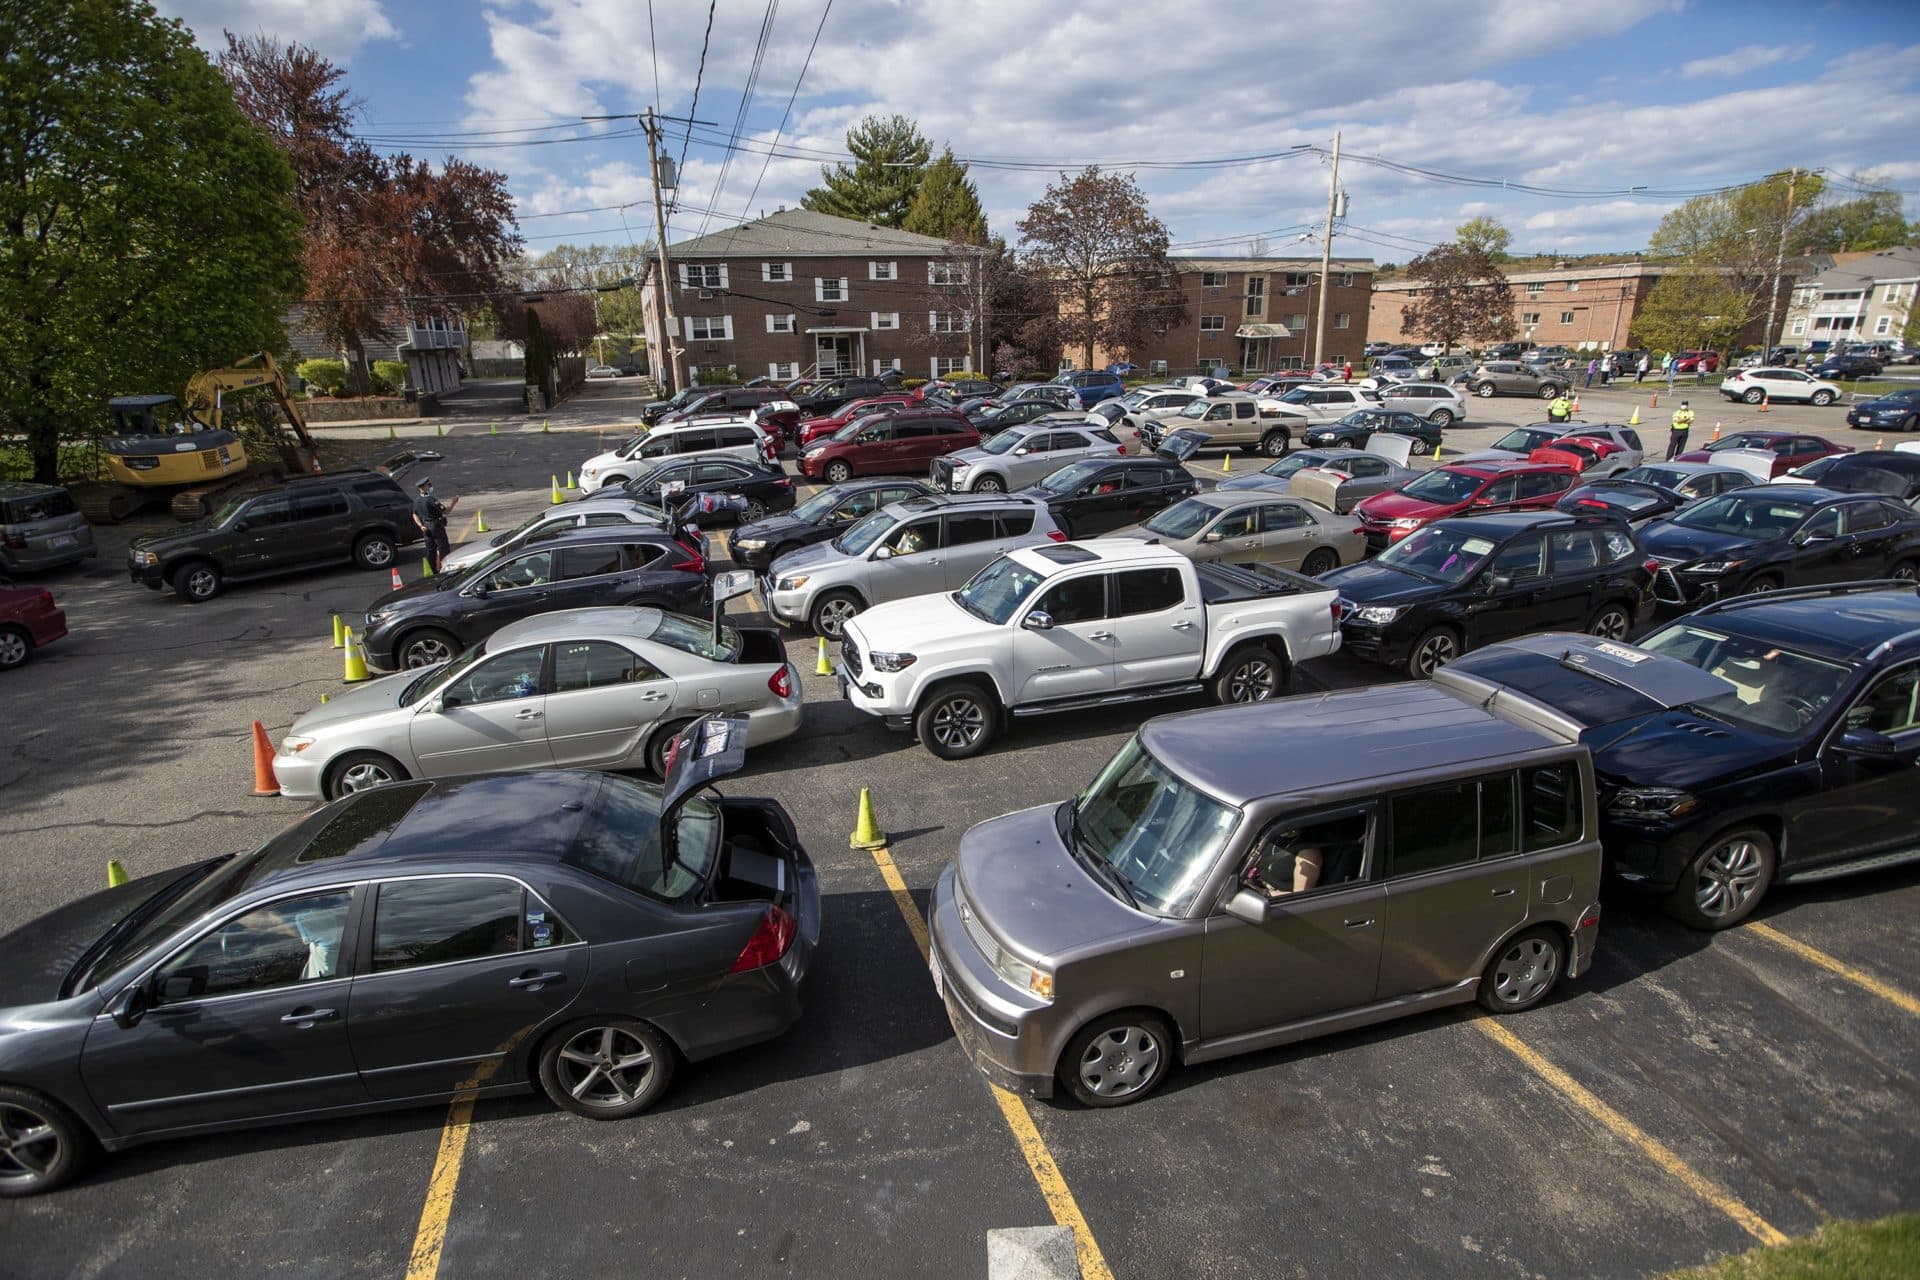 Cars waiting in line for food assistance. On that day, nearly 3,000 bags of groceries were passed out to families in need. (Jesse Costa/WBUR)